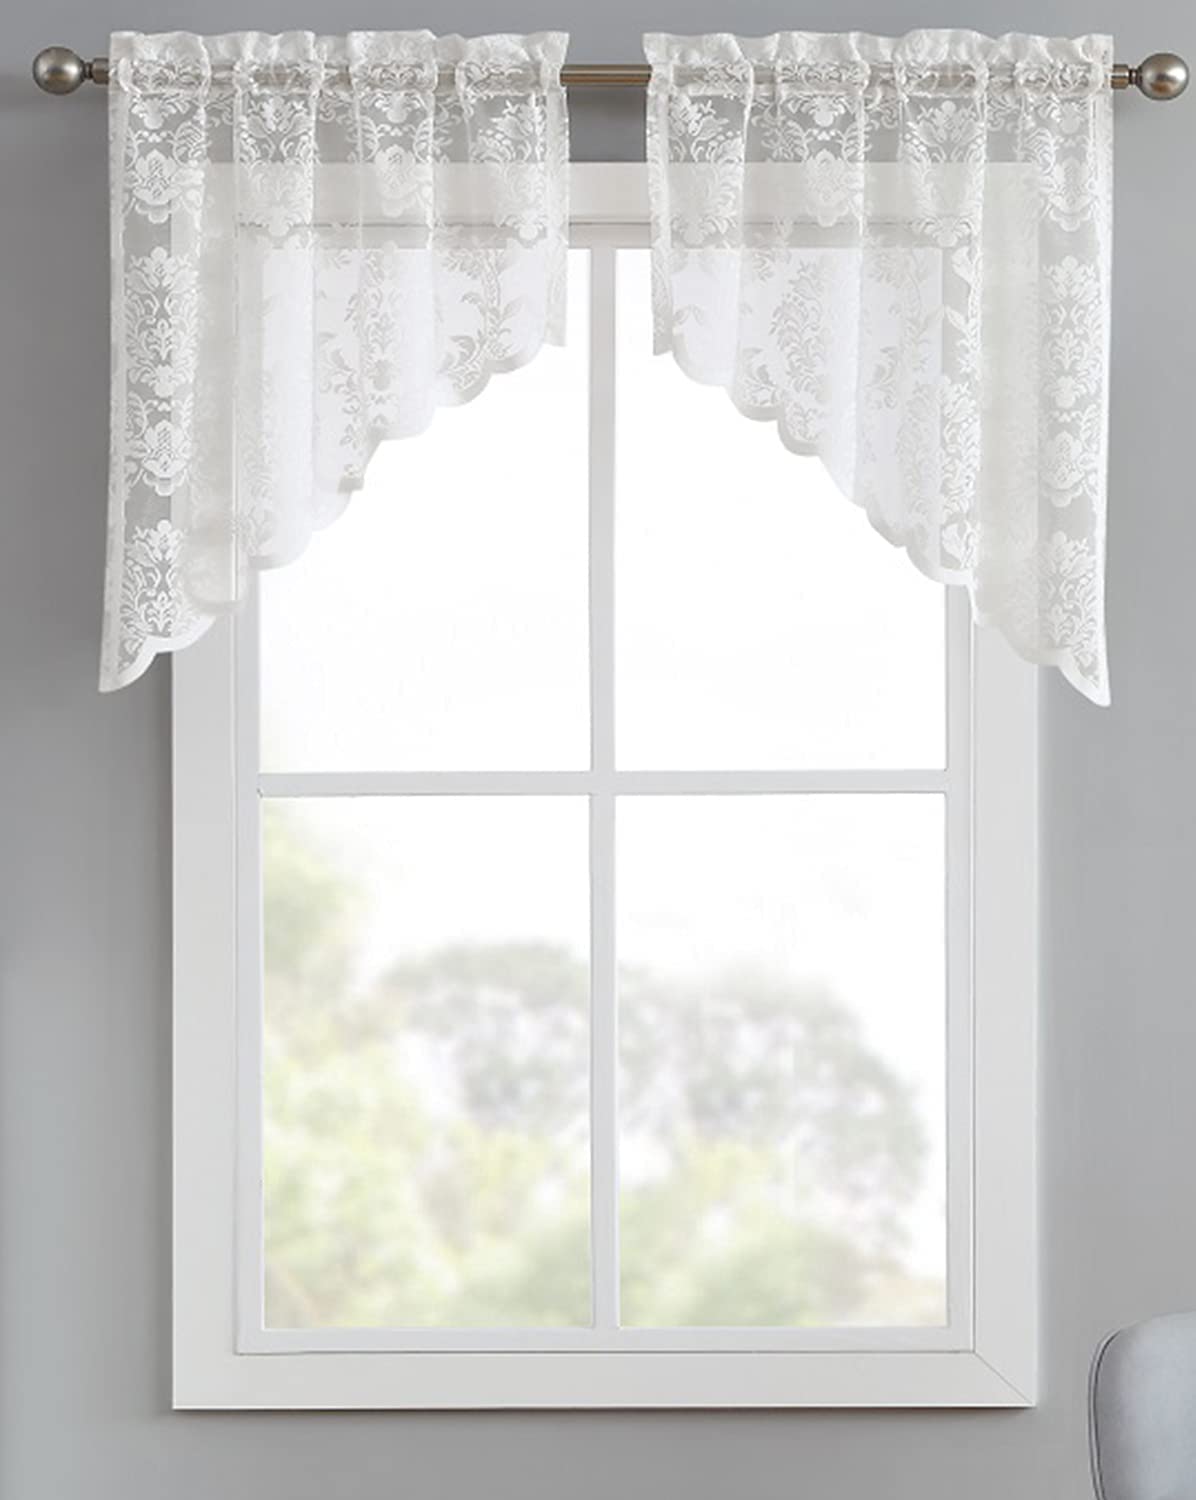 Warm Home Designs Pair Of Lace Kitchen Curtains With Flower Pattern Warmhomedesigns Com